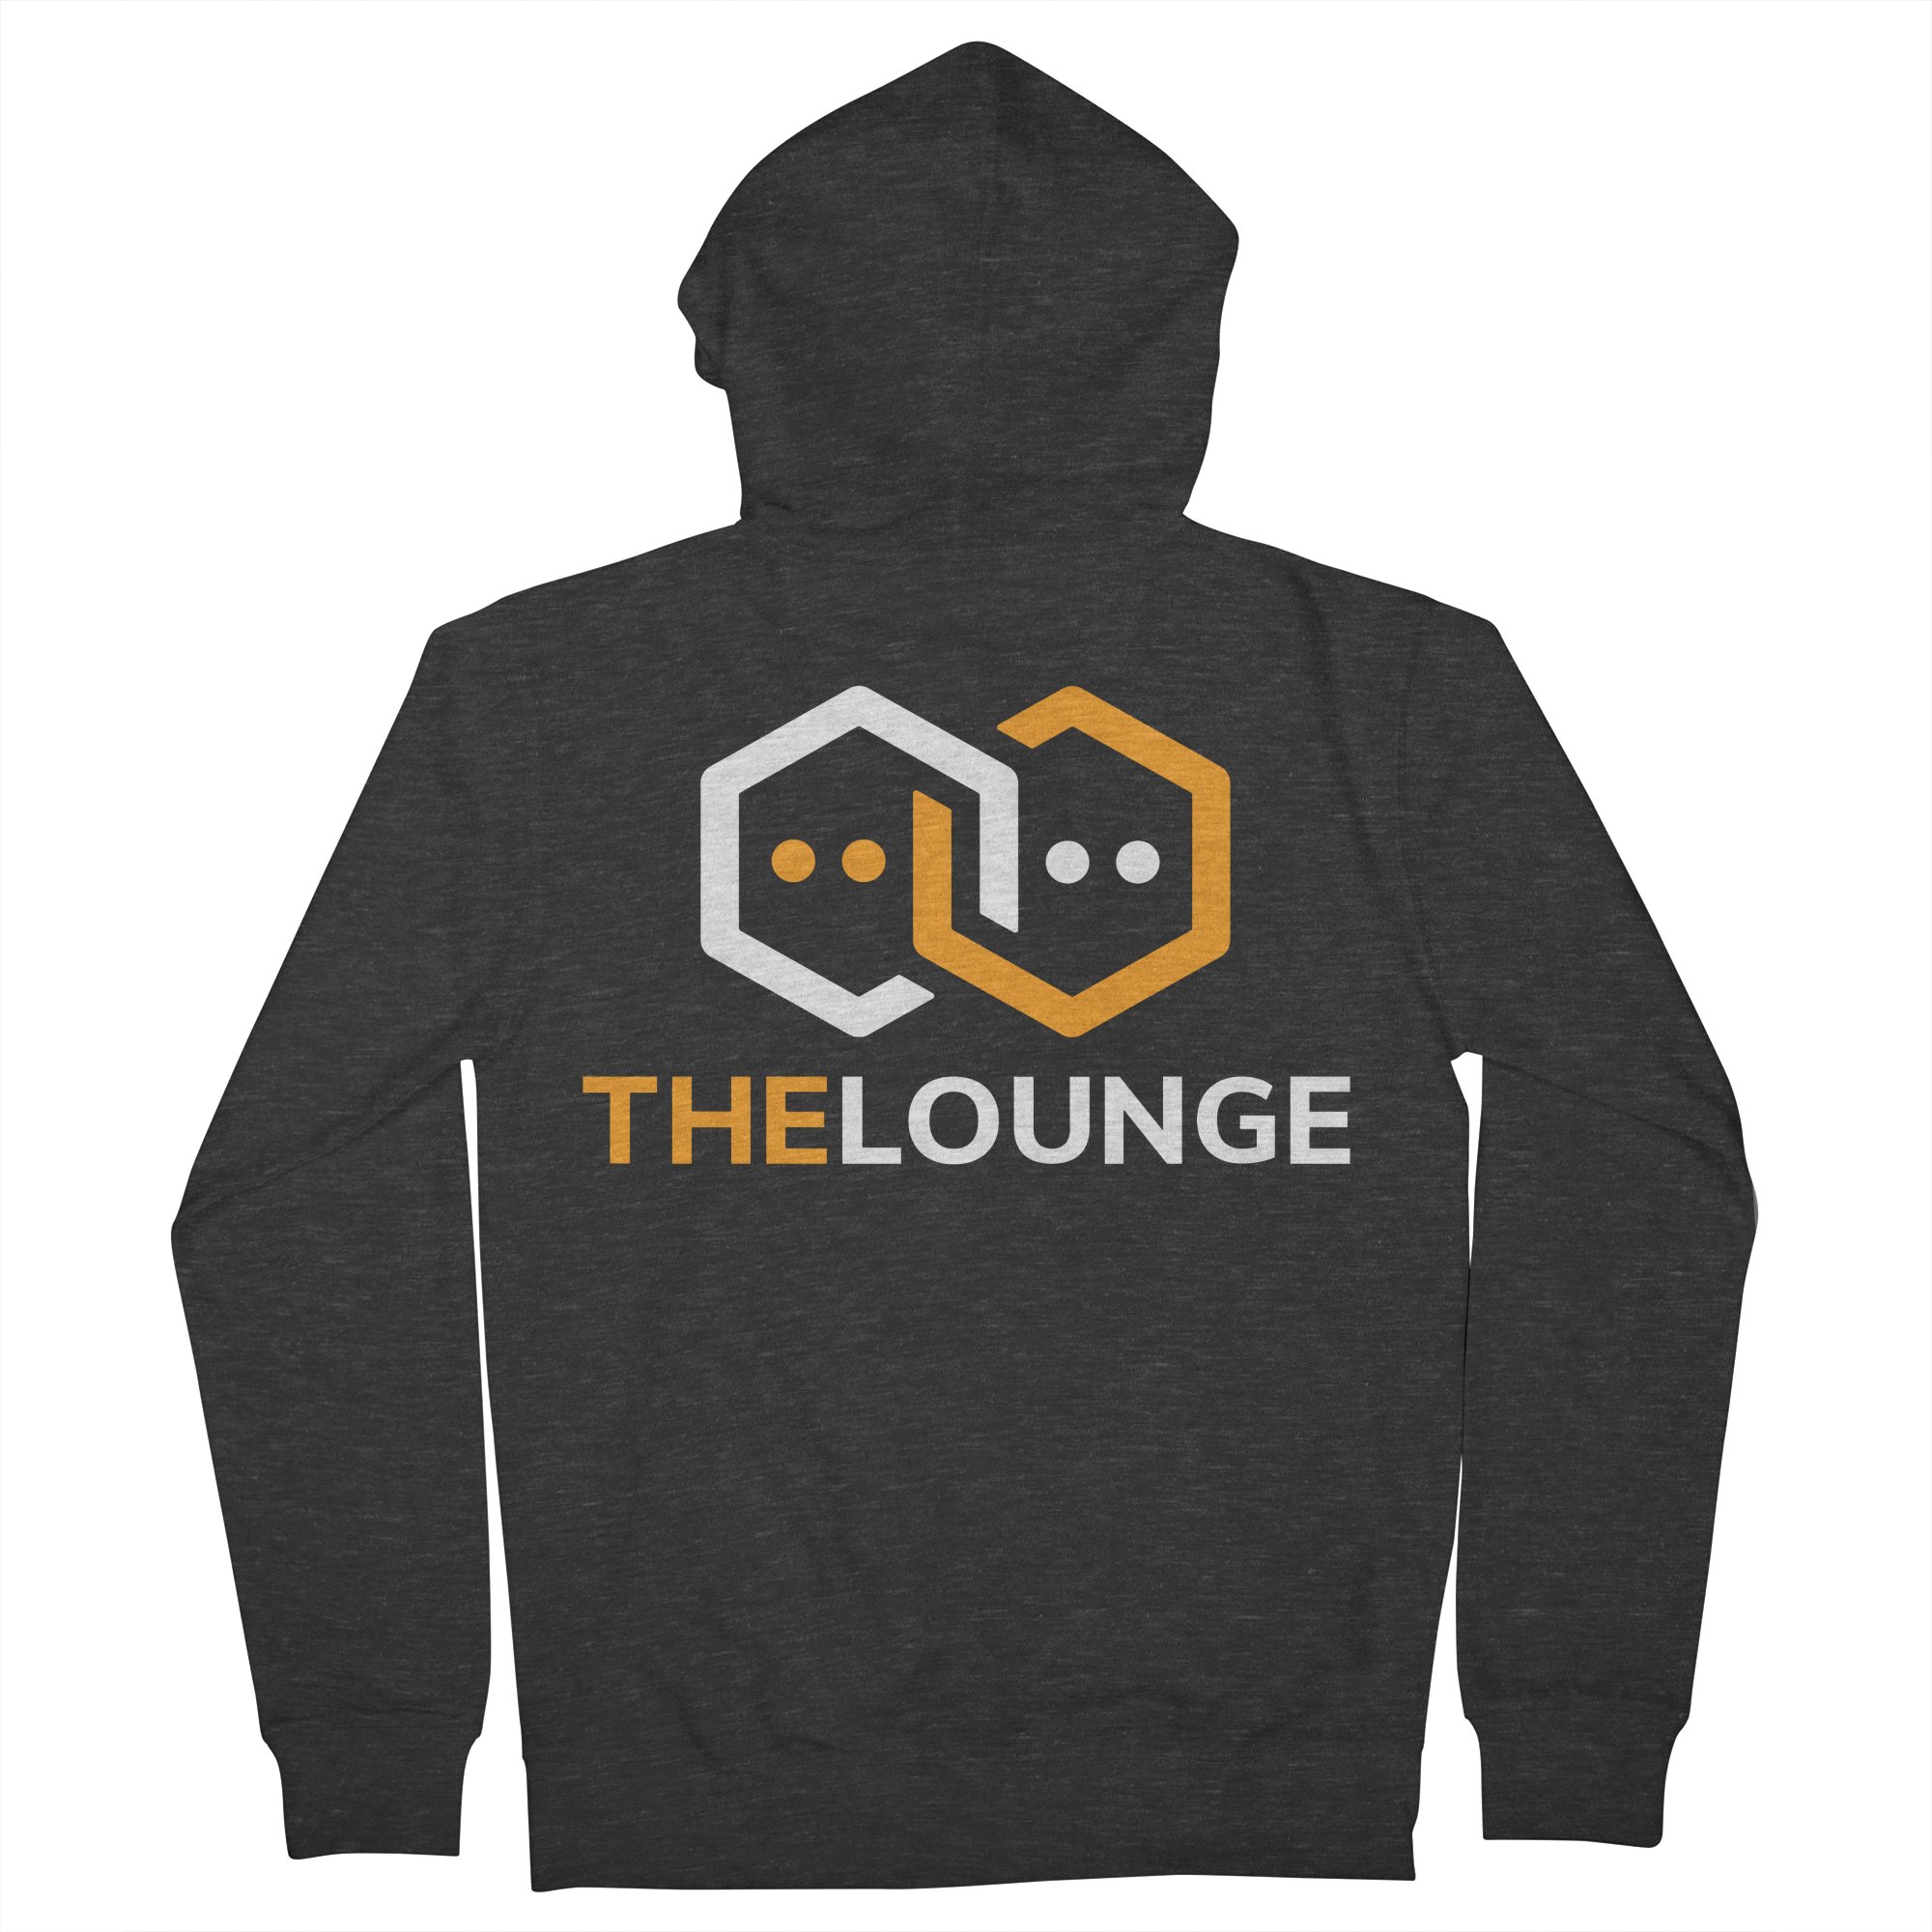 Smoke zip-up hoodie with inverted The Lounge logo